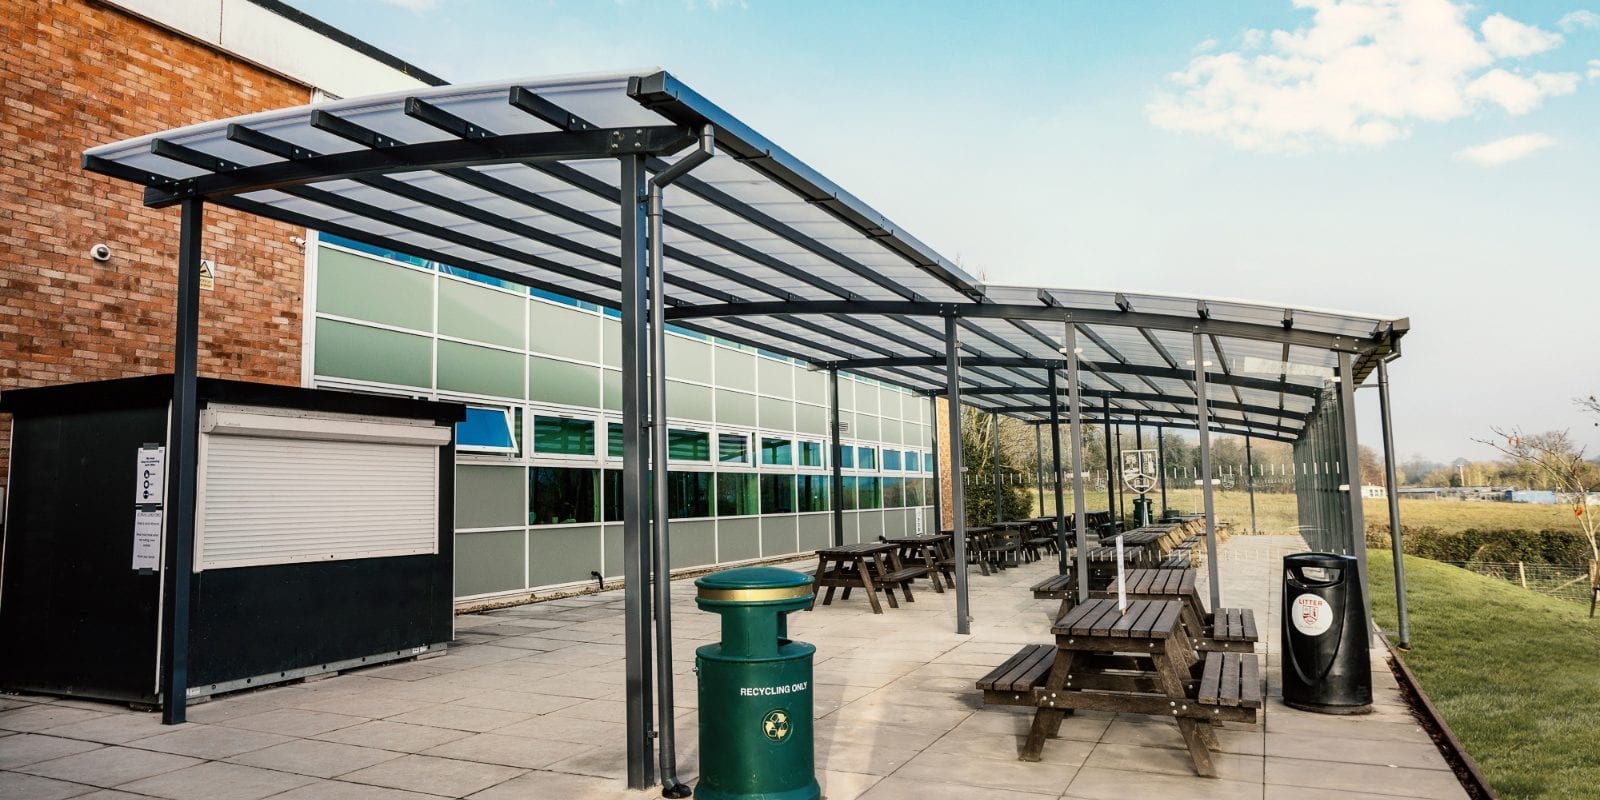 Curved roof canopy we designed for The Chantry School